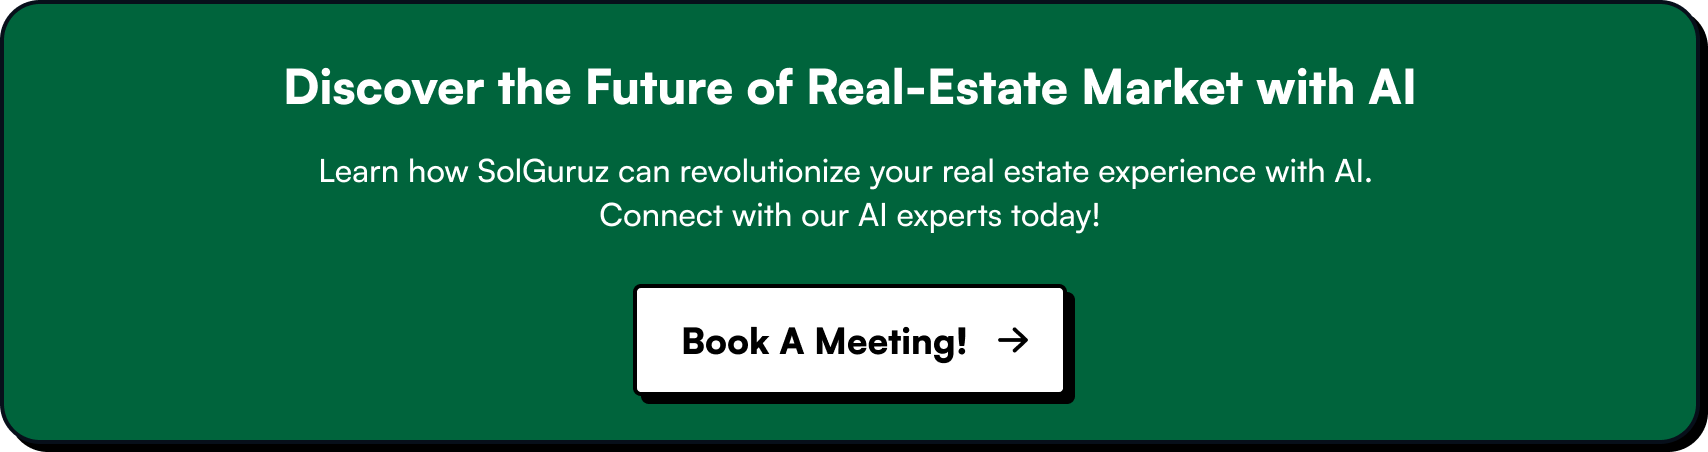 Discover the Future of Real-Estate Market with AI